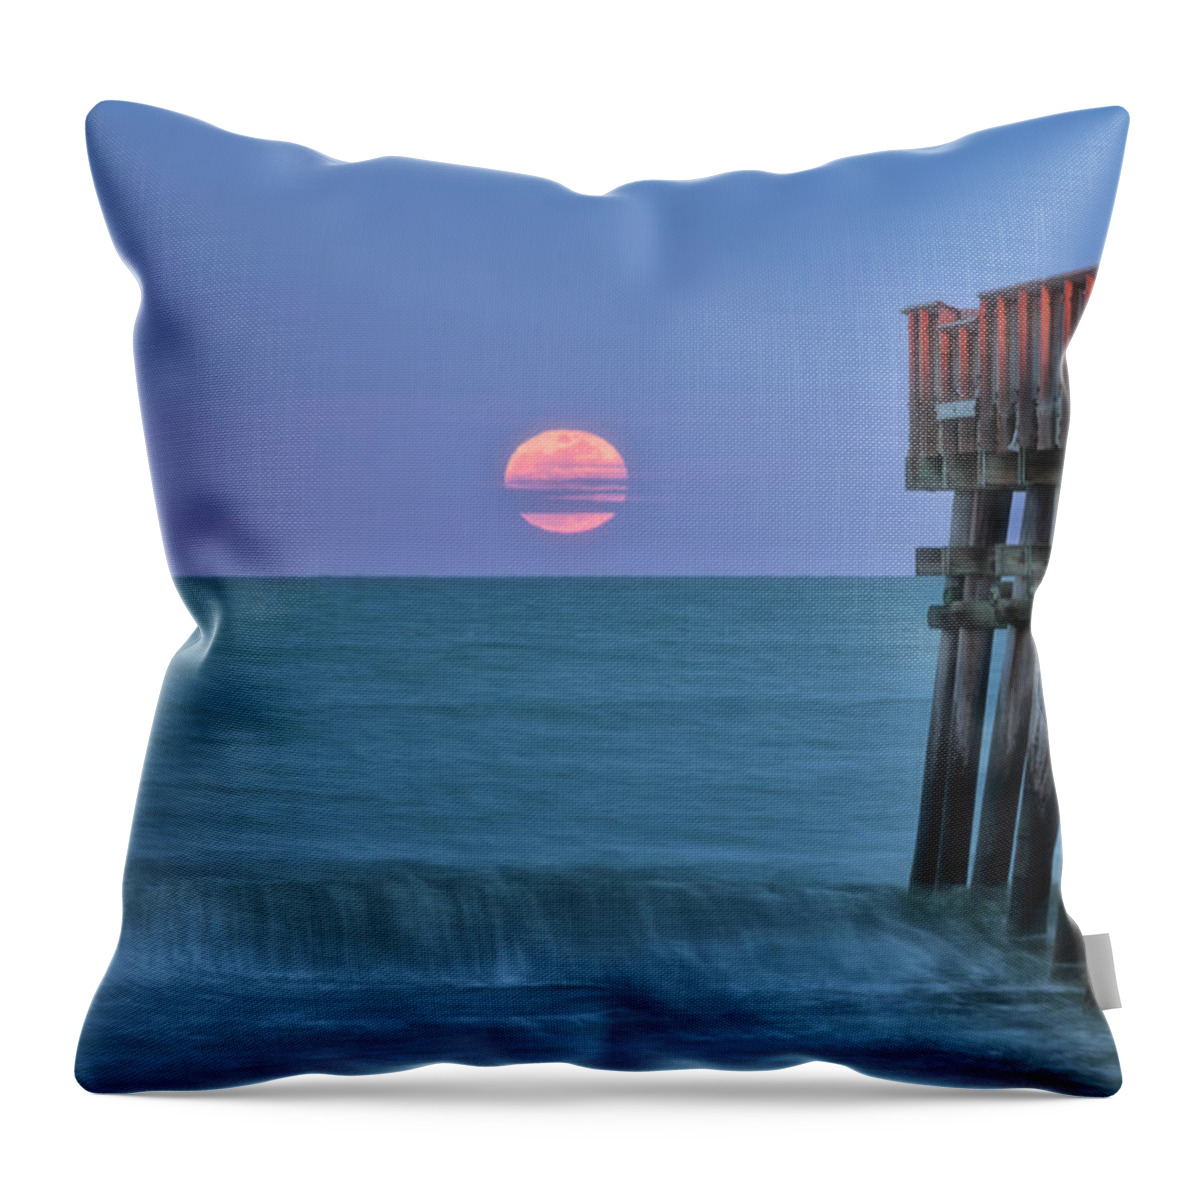 Snow Moon Throw Pillow featuring the photograph Snow Moon by Russell Pugh